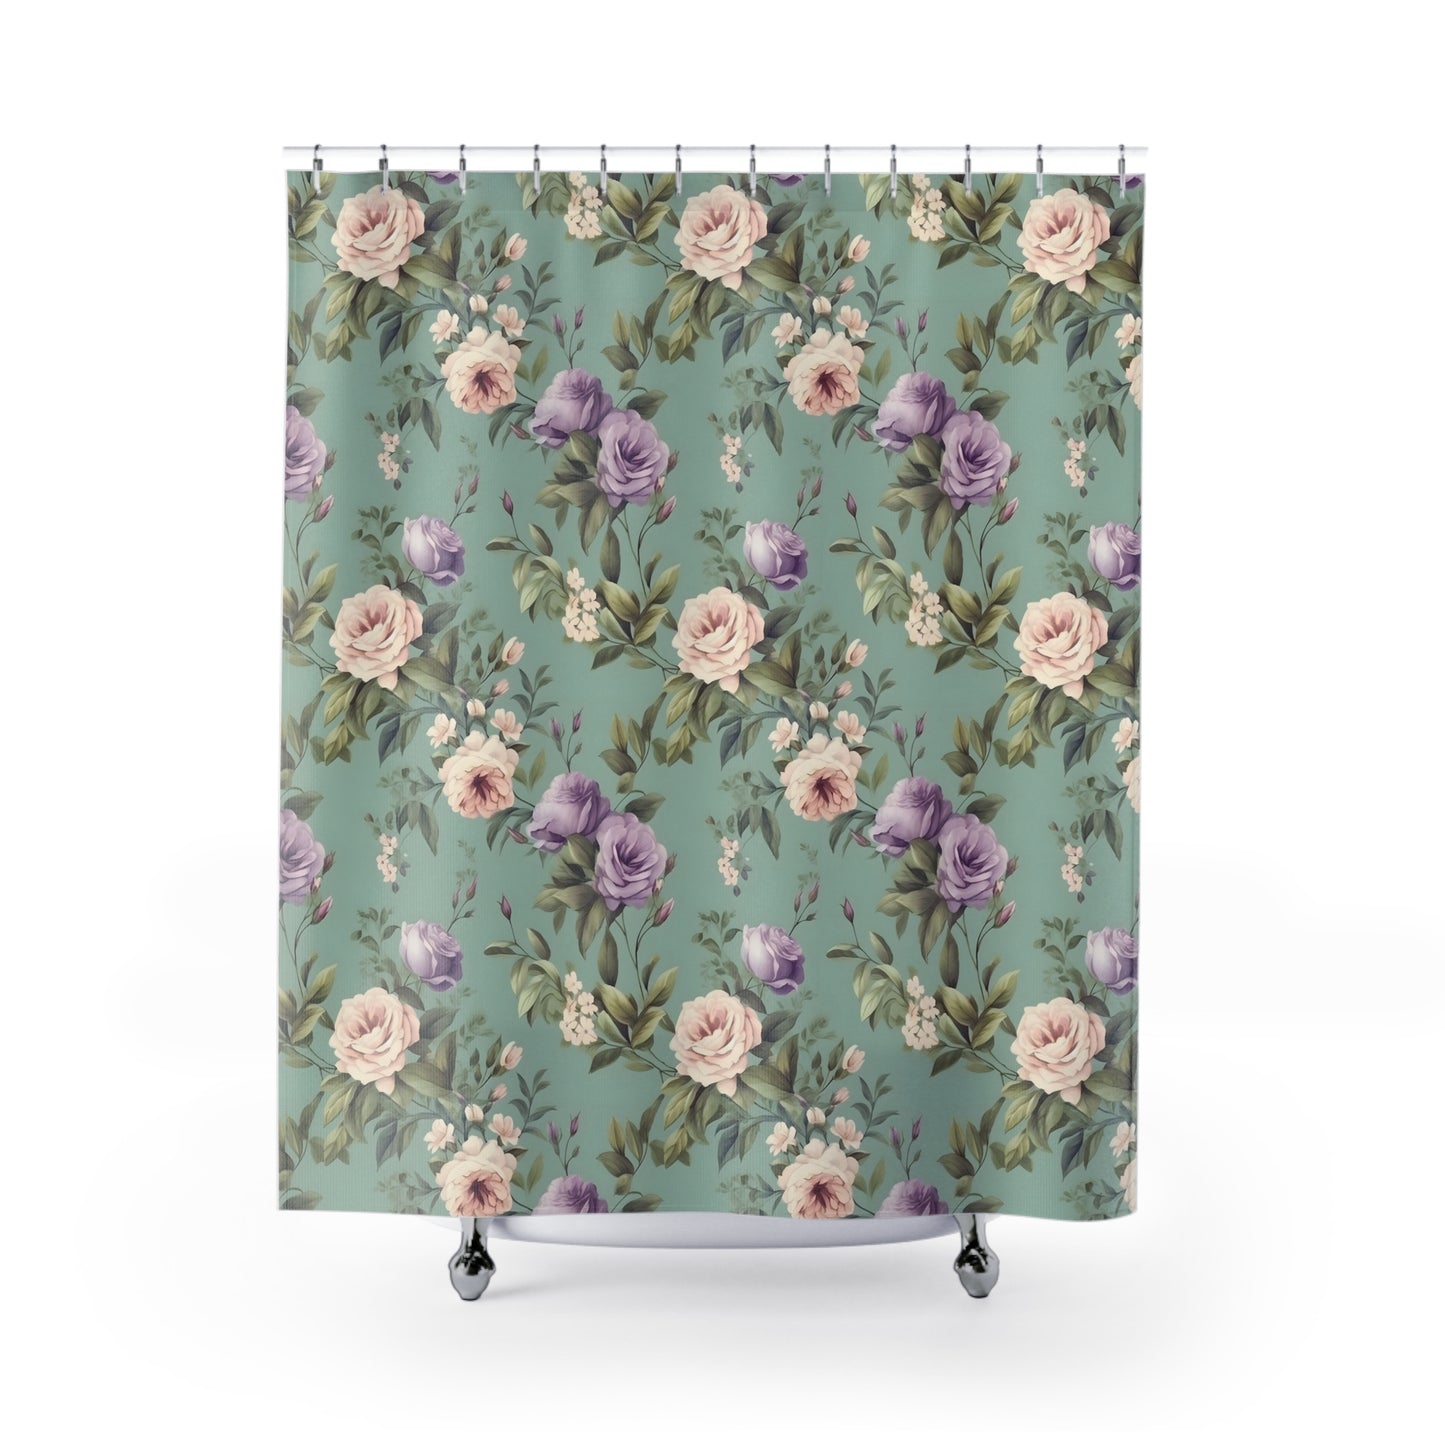 sage green shower curtain with white and purple rose floral print